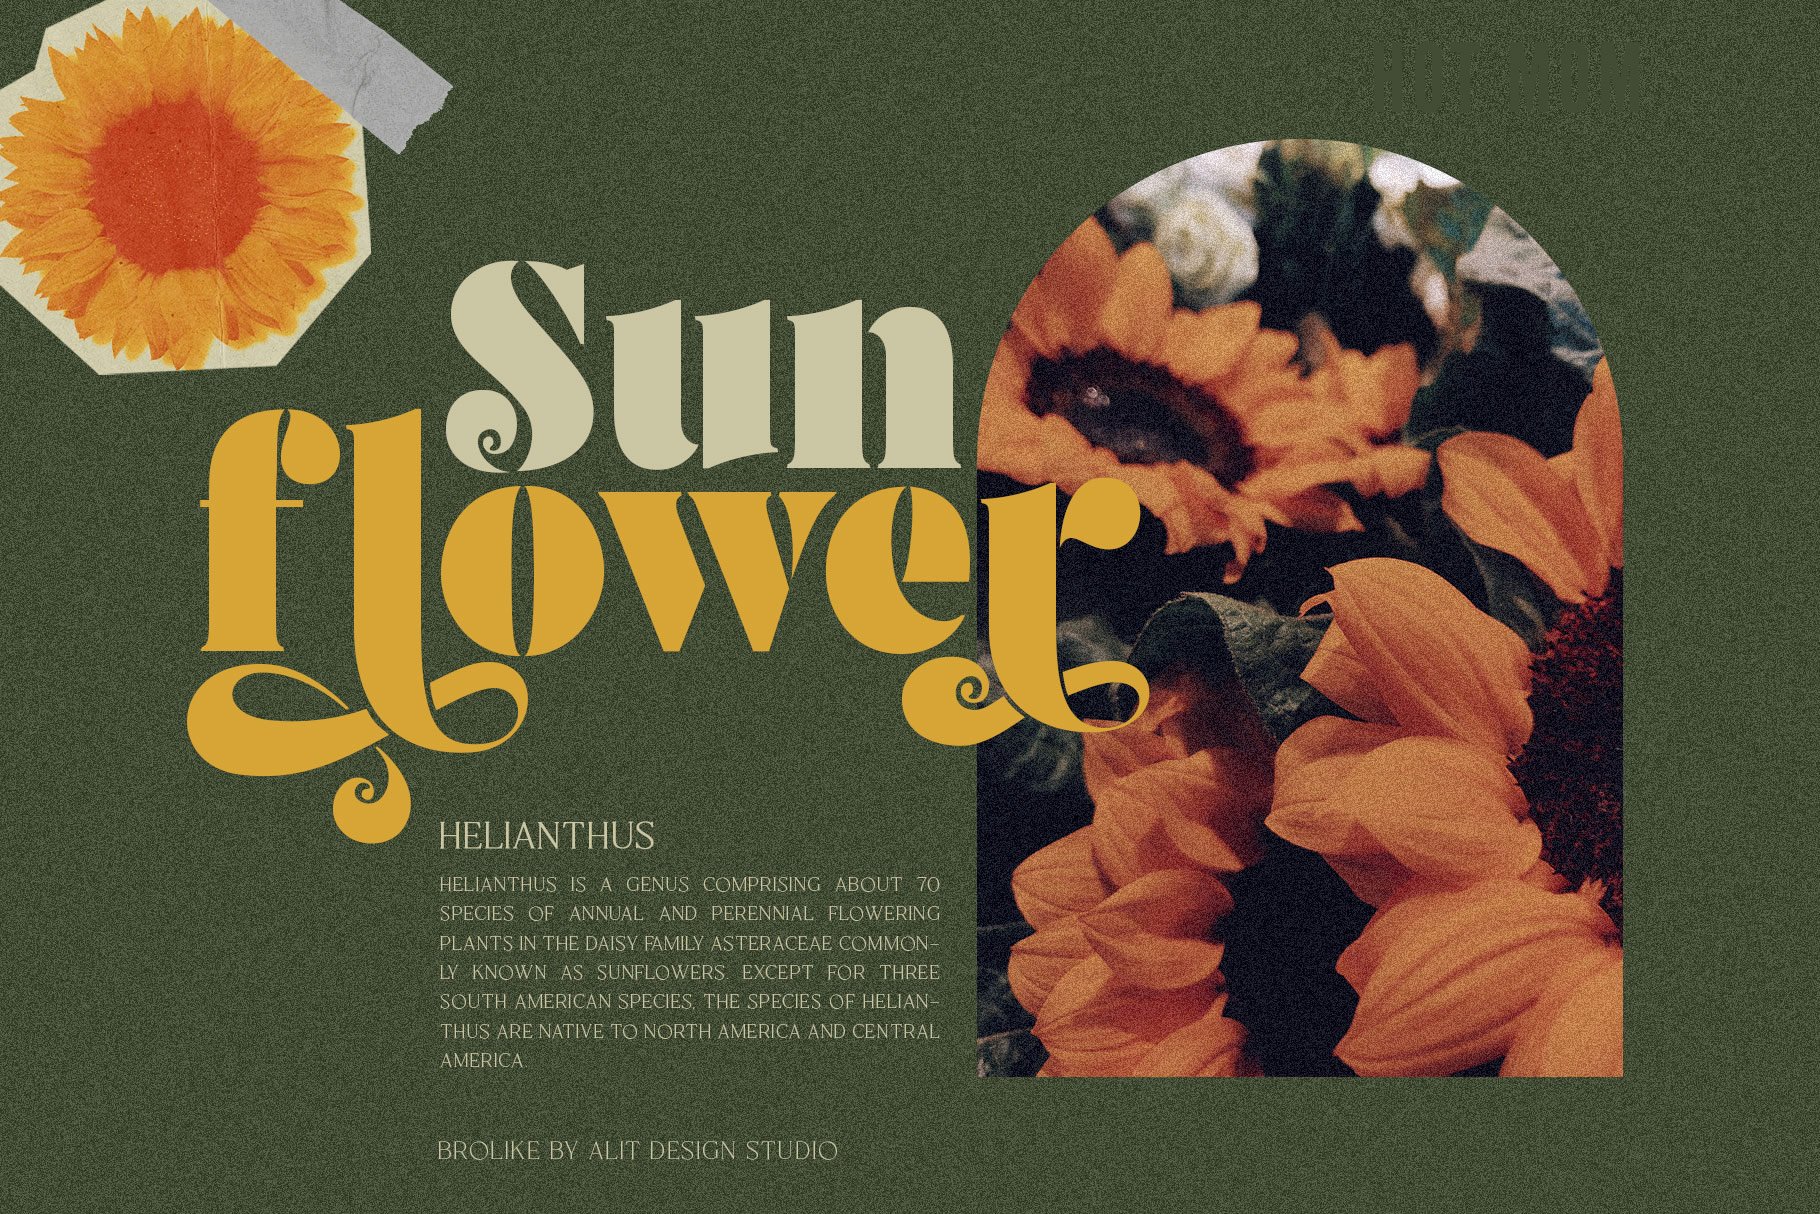 A sunflower is shown with the words sunflower above it.